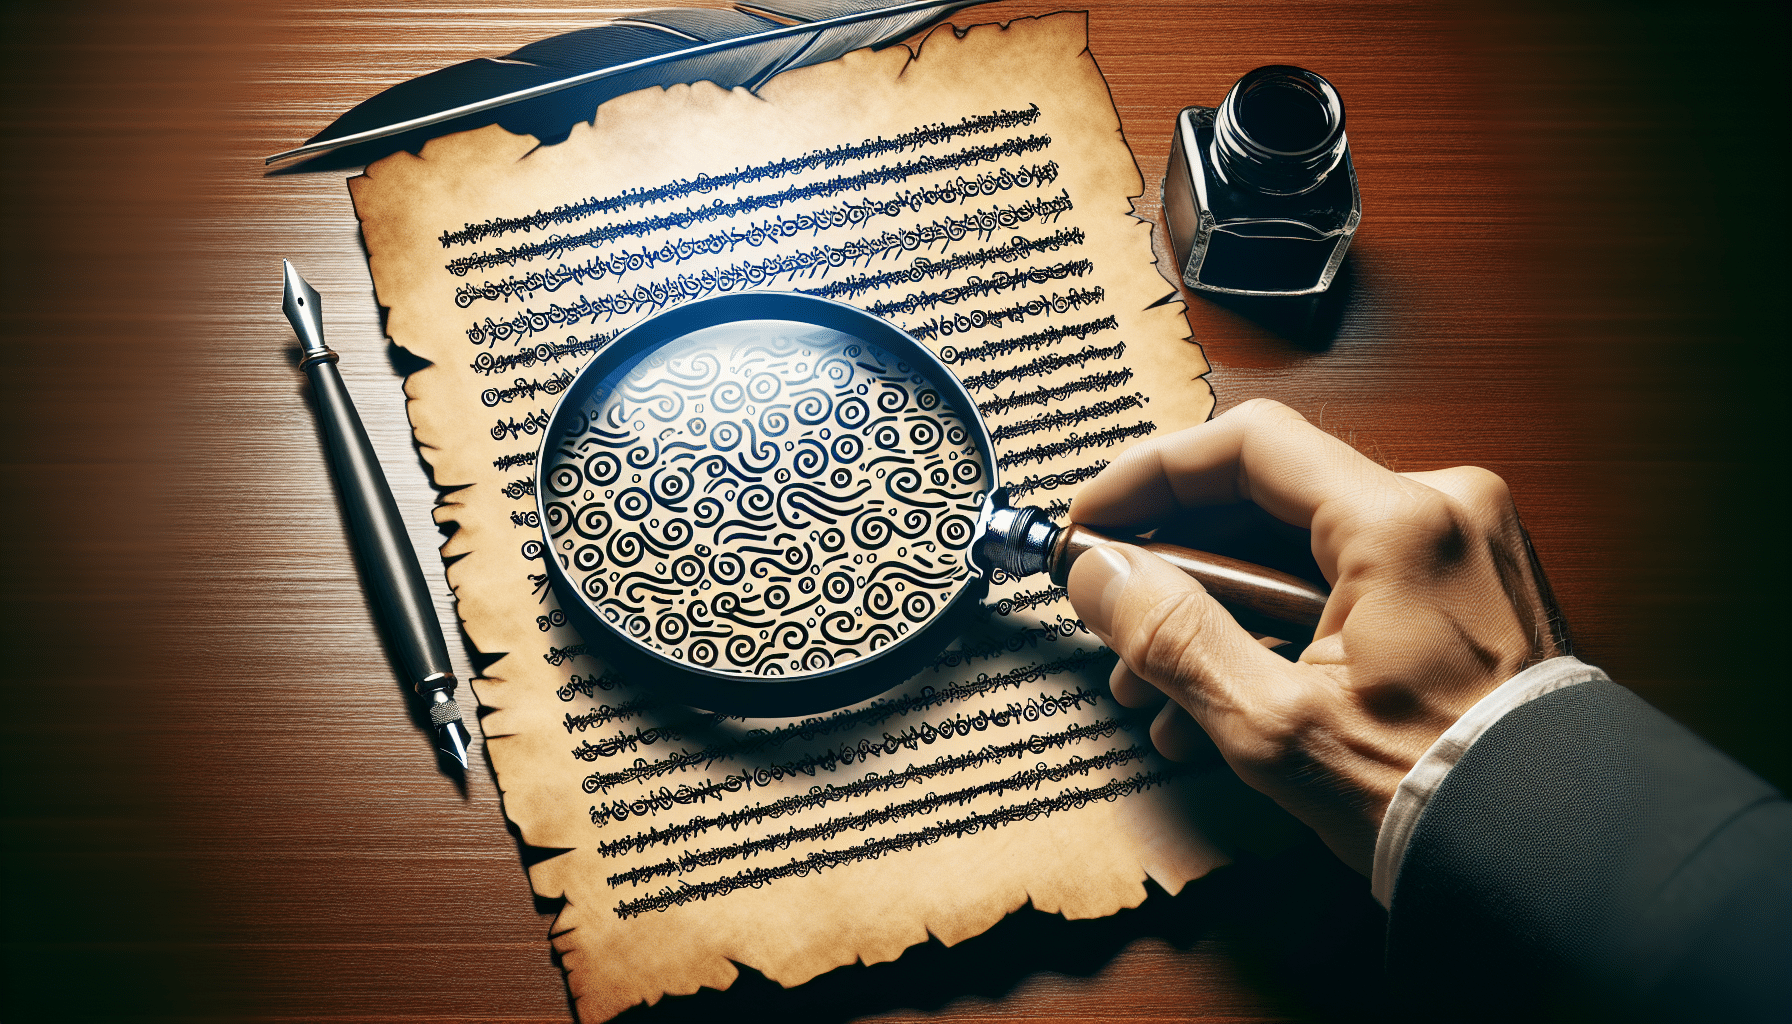 A magnifying glass focusing on enhancing content quality and relevance